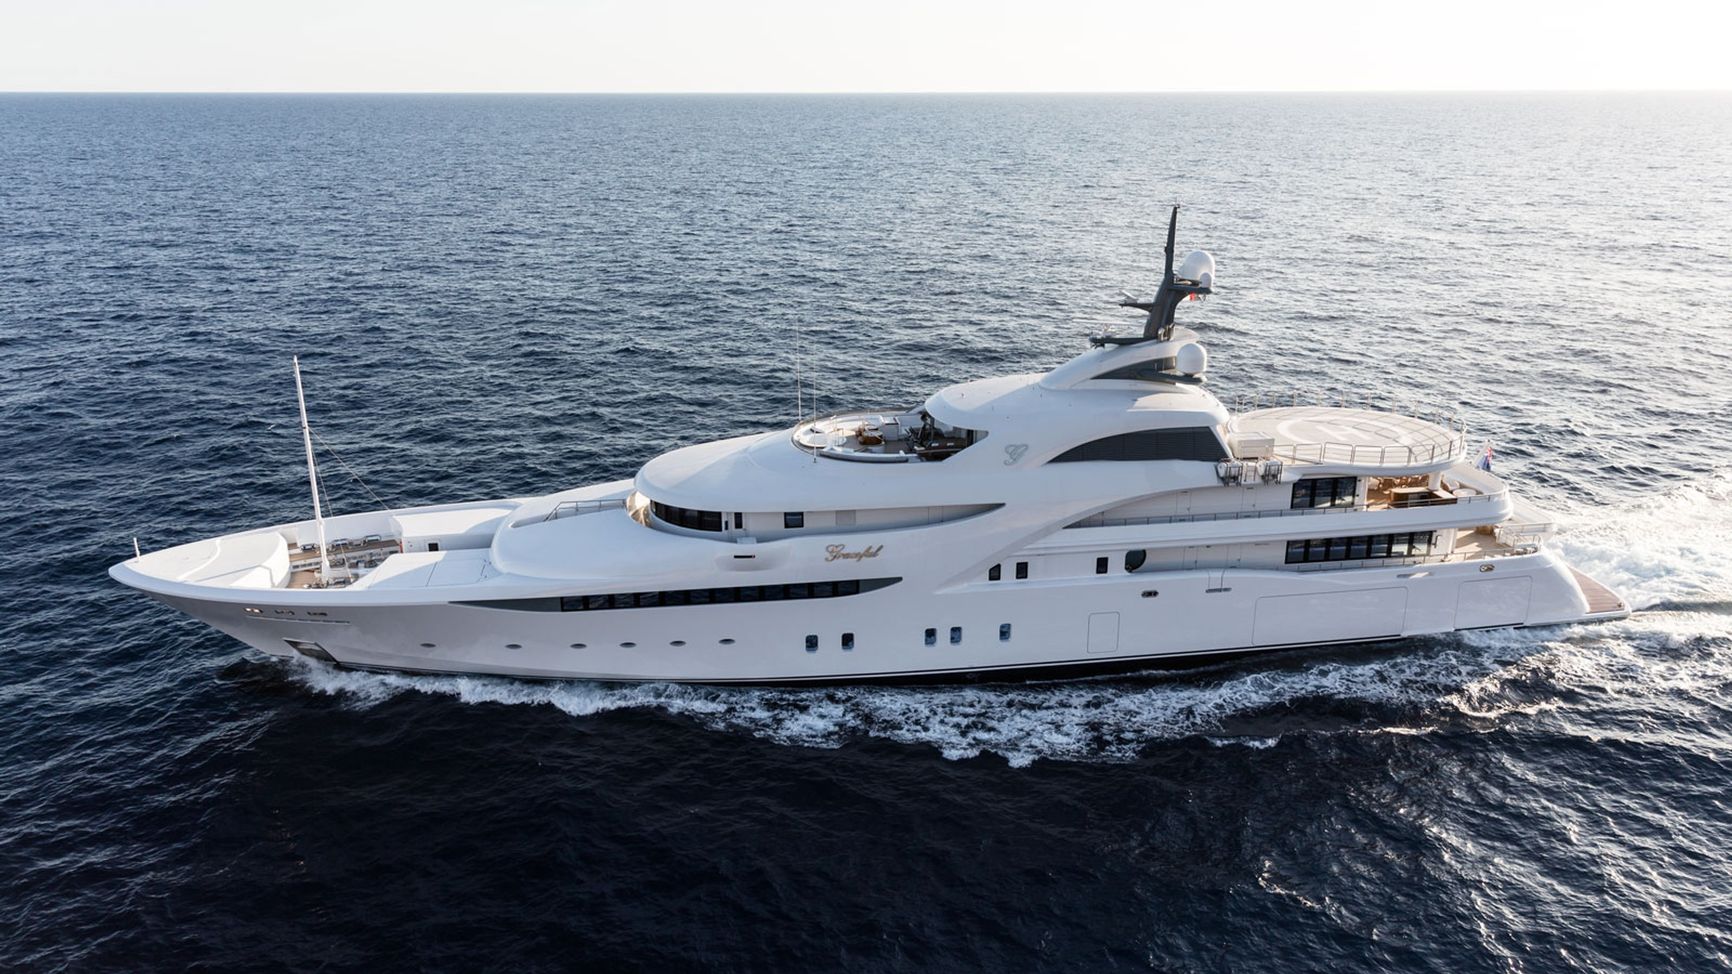 Graceful is one of several Putin yachts